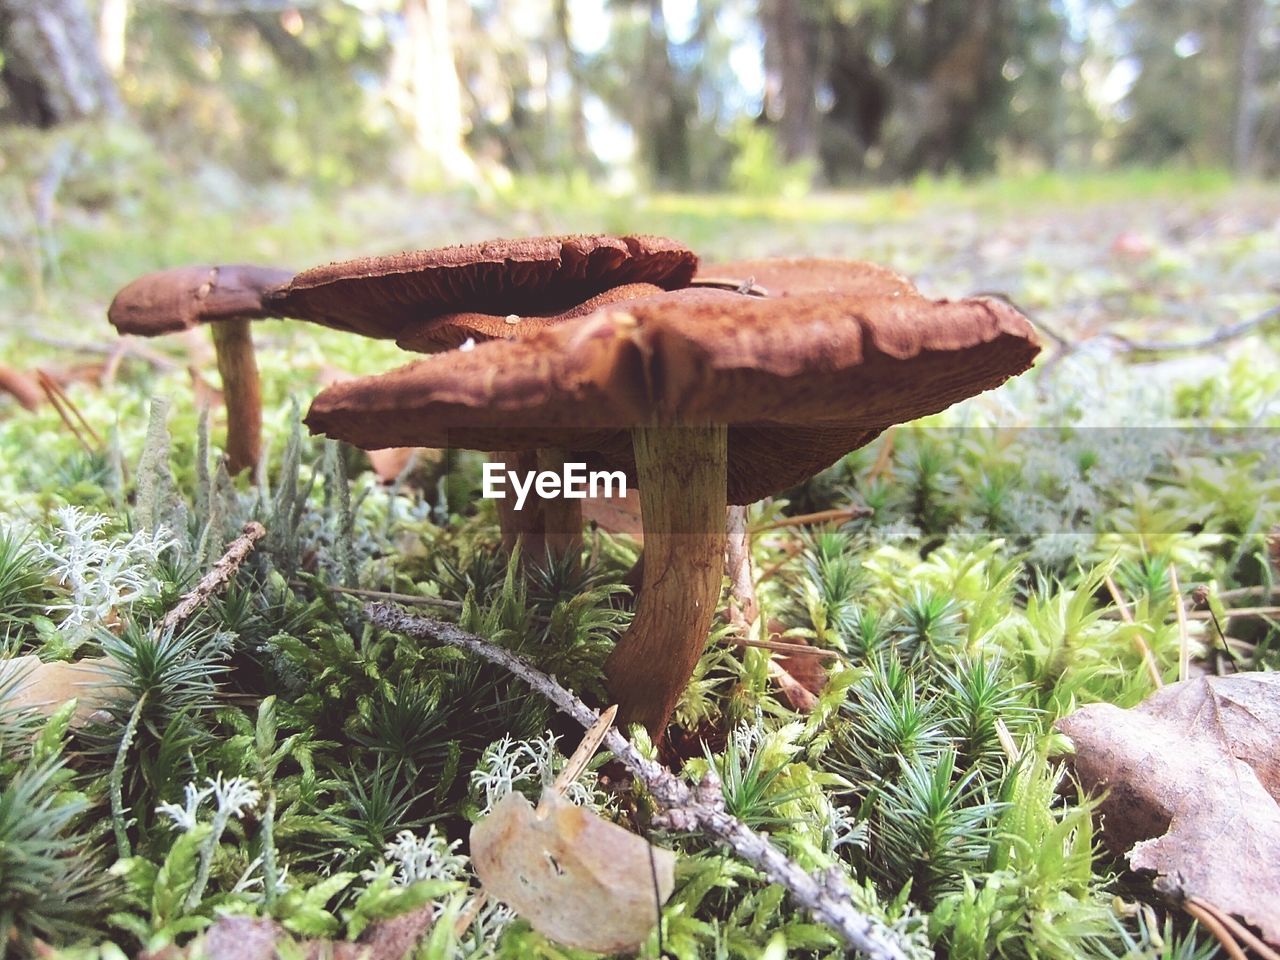 MUSHROOMS GROWING IN FOREST